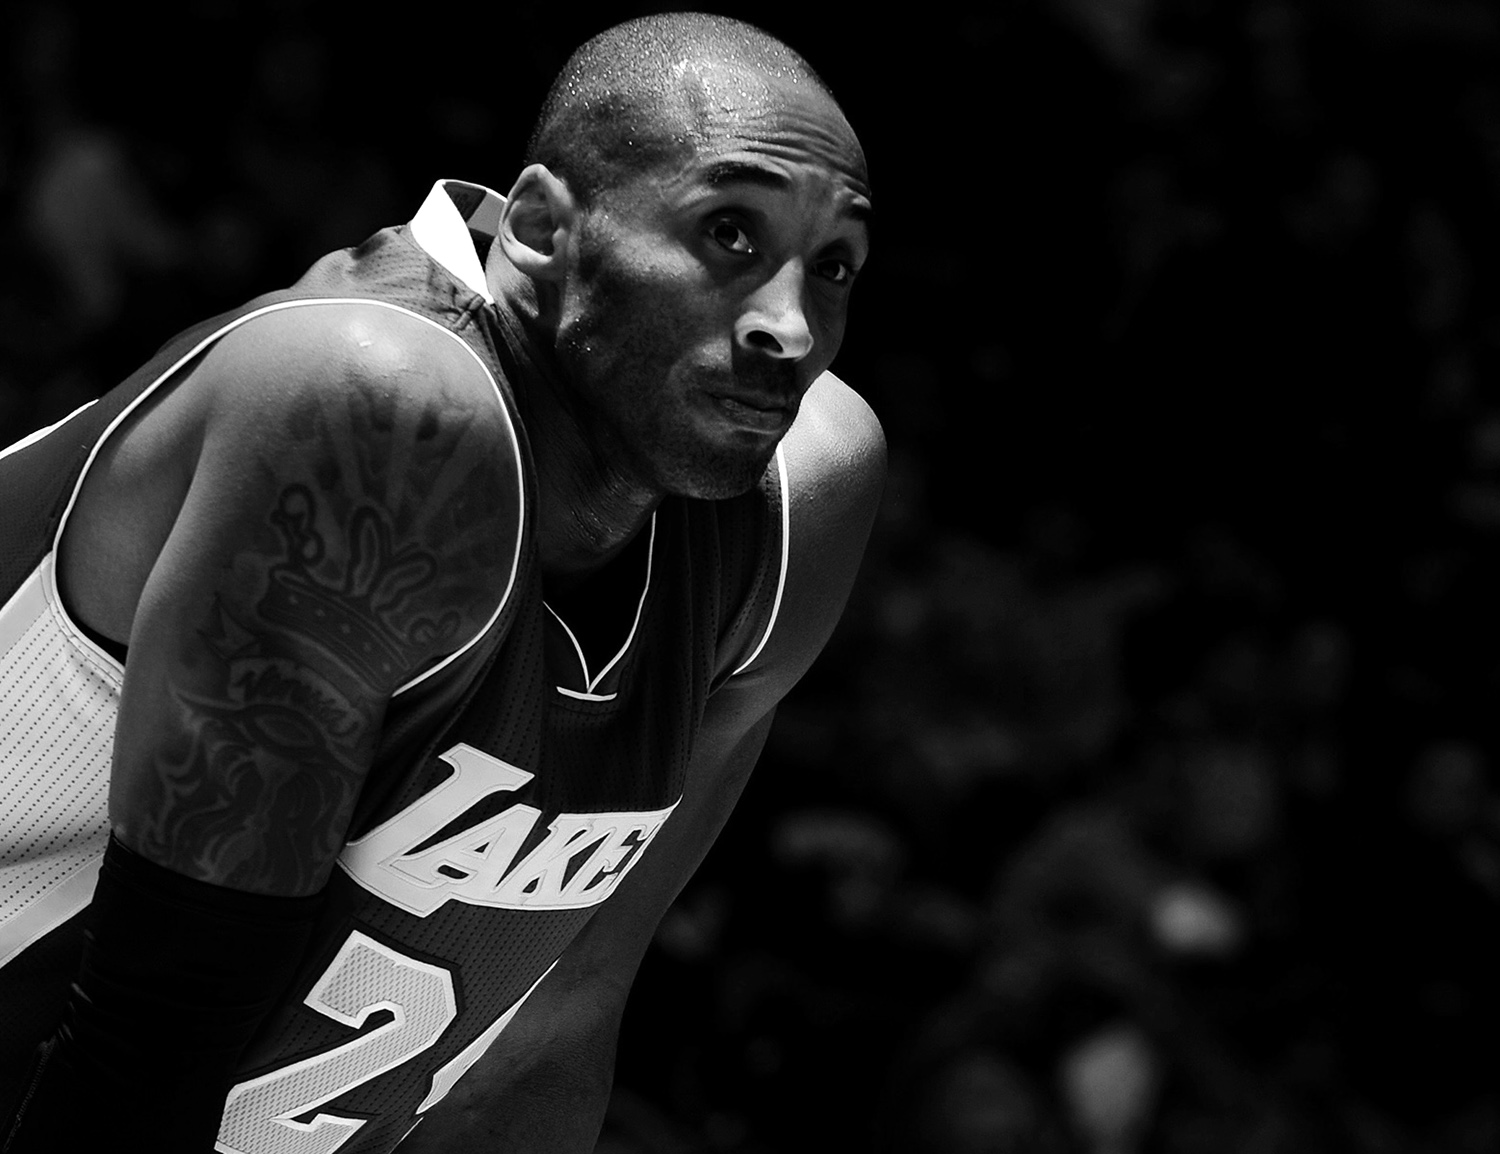 VTB League to honor Kobe Bryant with a moment of silence